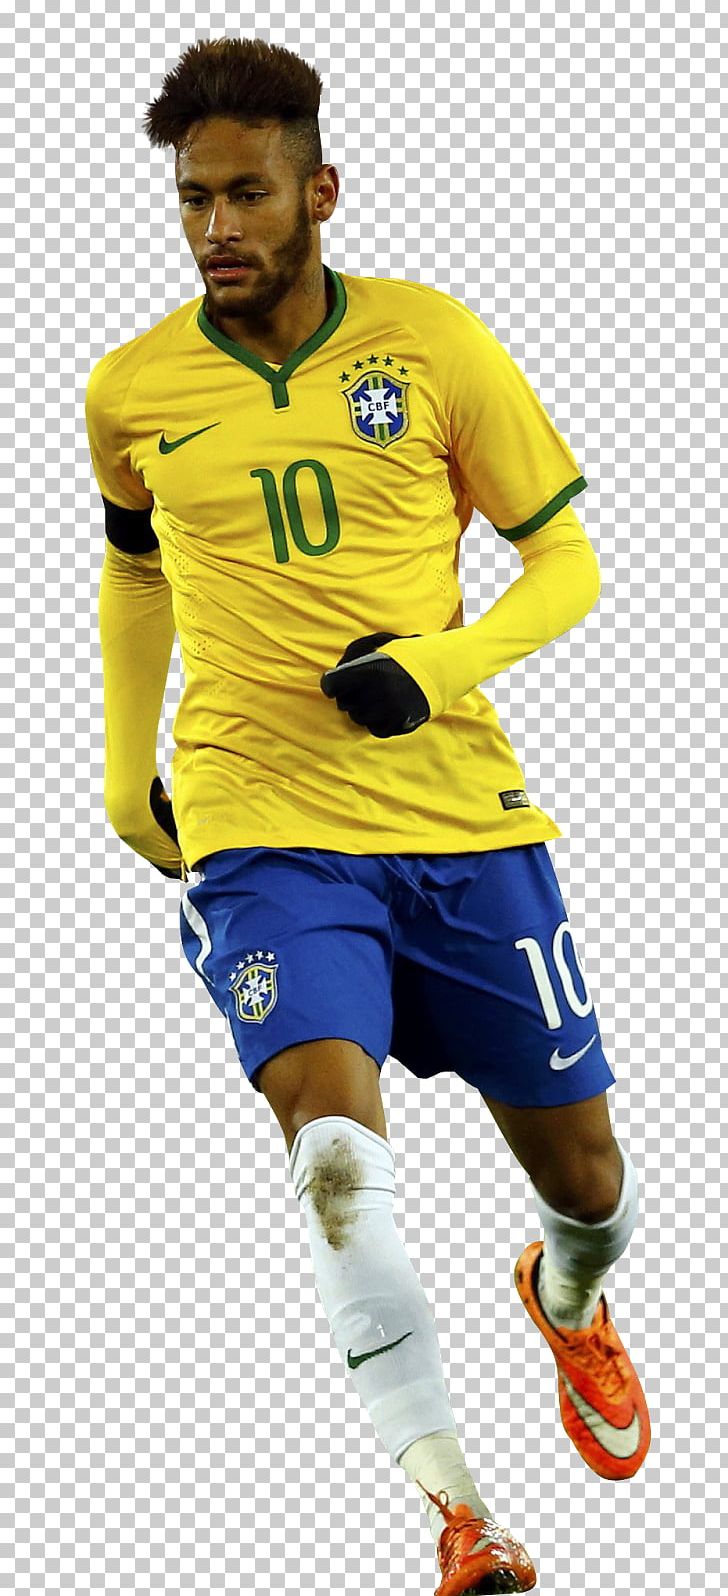 Neymar Brazil National Football Team Jersey Argentina–Brazil Football Rivalry PNG, Clipart, Ball, Brazil, Brazilian Football Confederation, Celebrities, Clothing Free PNG Download